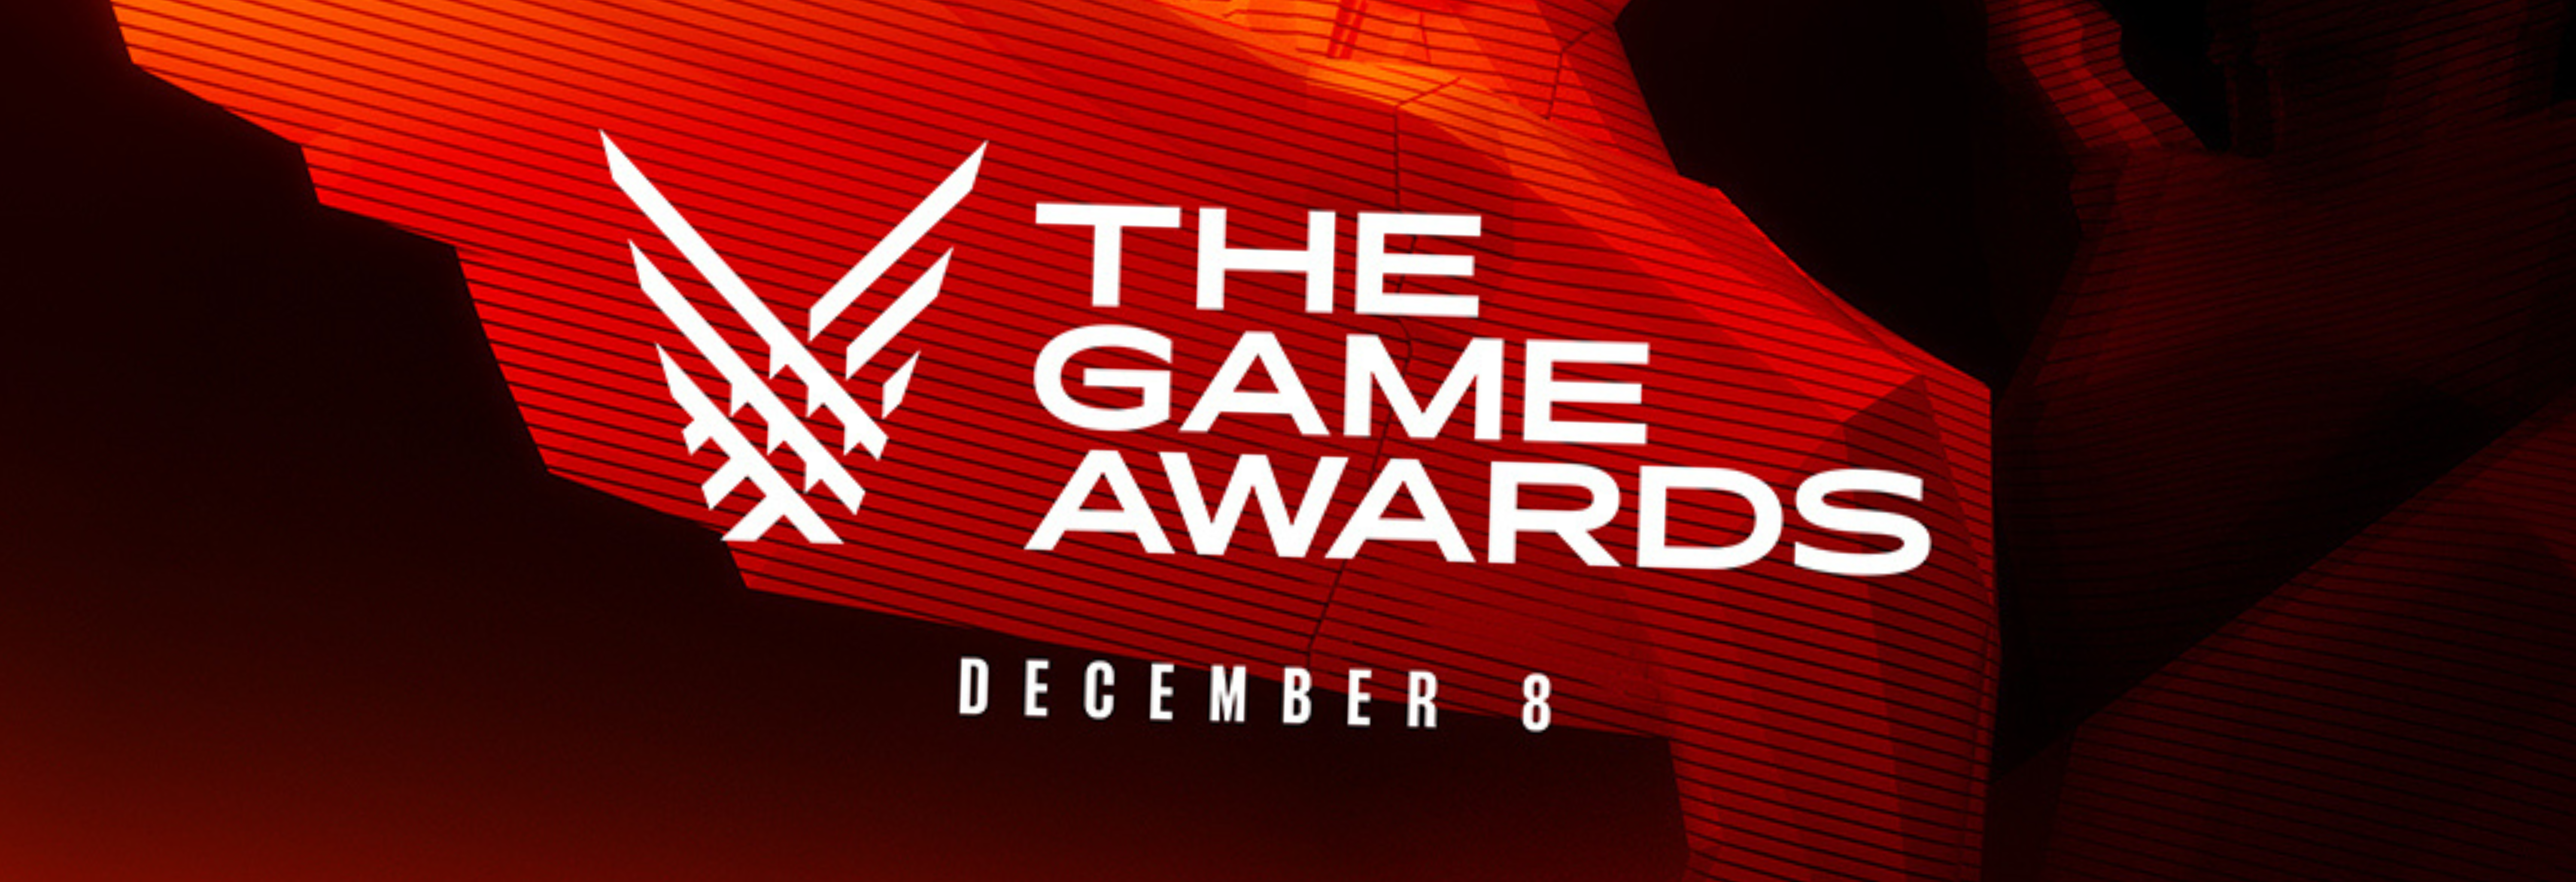 Game-awards-2022-cermony-activision-sony-ea-gaming-industry-nominations-artworking-packaging-packshots-tapestry-soho